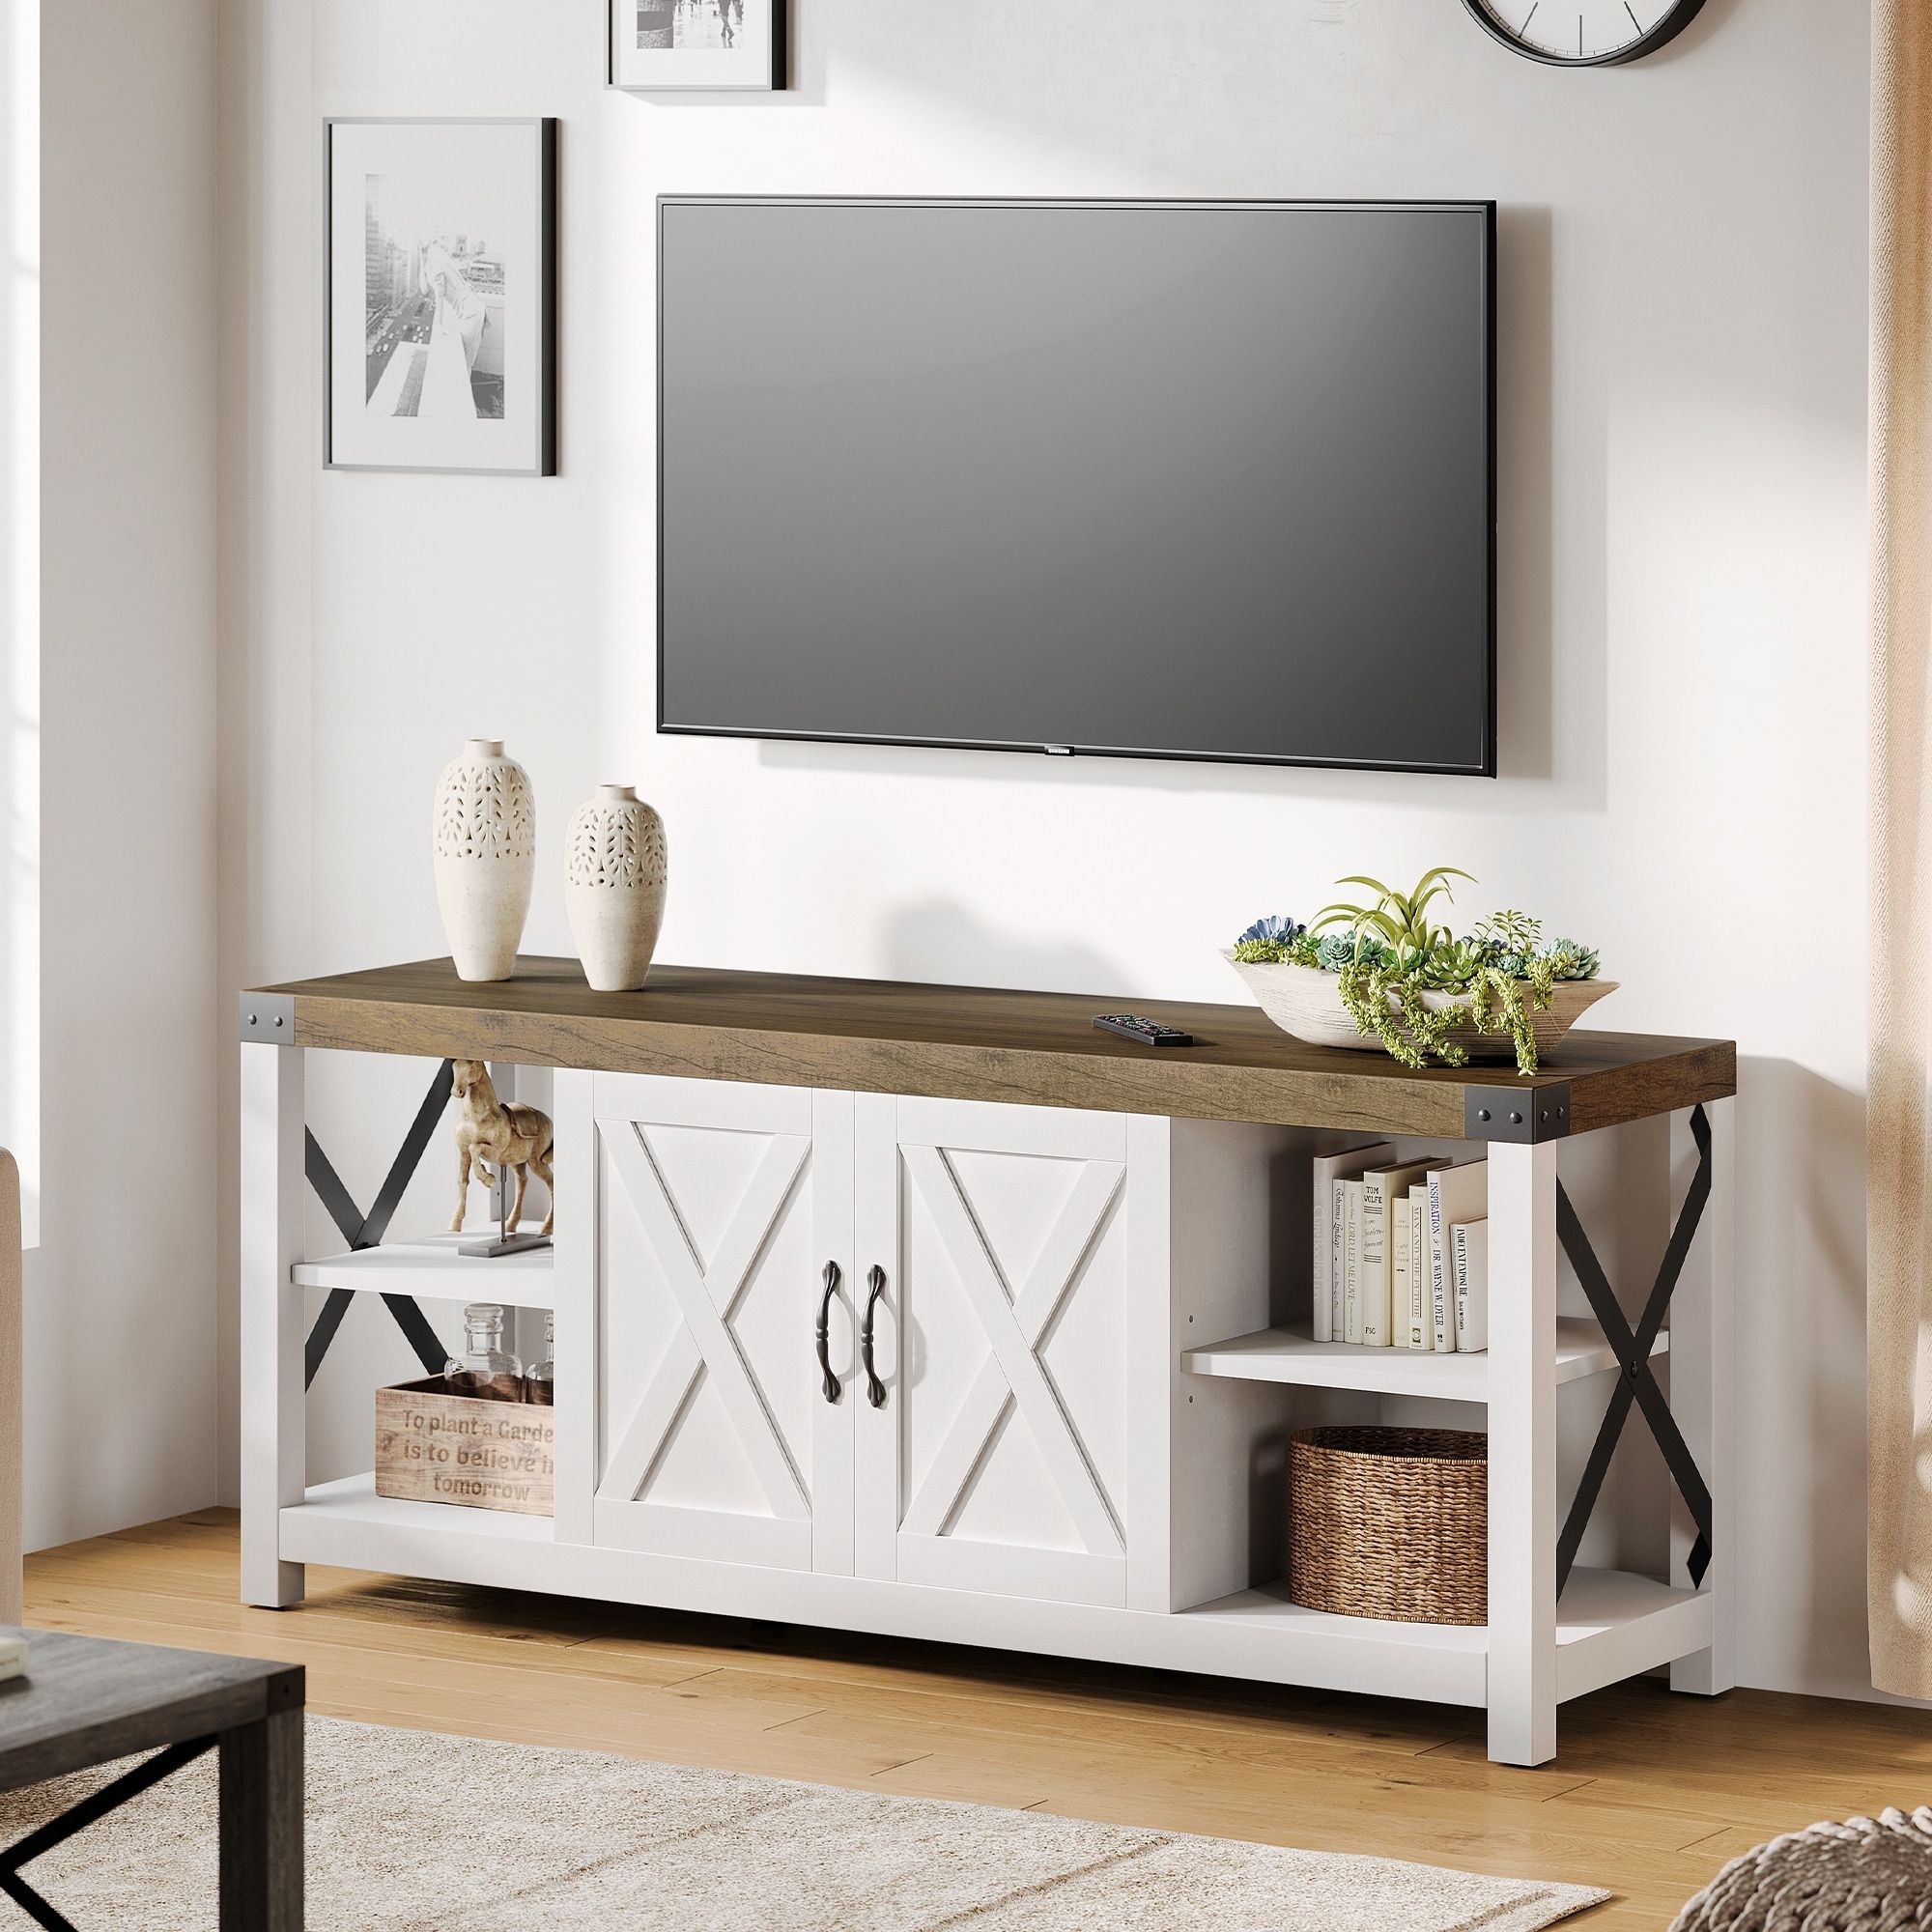 59 Inch Tv Stand For Tv Up To 50 60 65 Inches, Farmhouse Wood Tv Cabinet  Entertainment Center – 59" – On Sale – Bed Bath & Beyond – 36742172 Regarding Farmhouse Tv Stands (Photo 5 of 15)